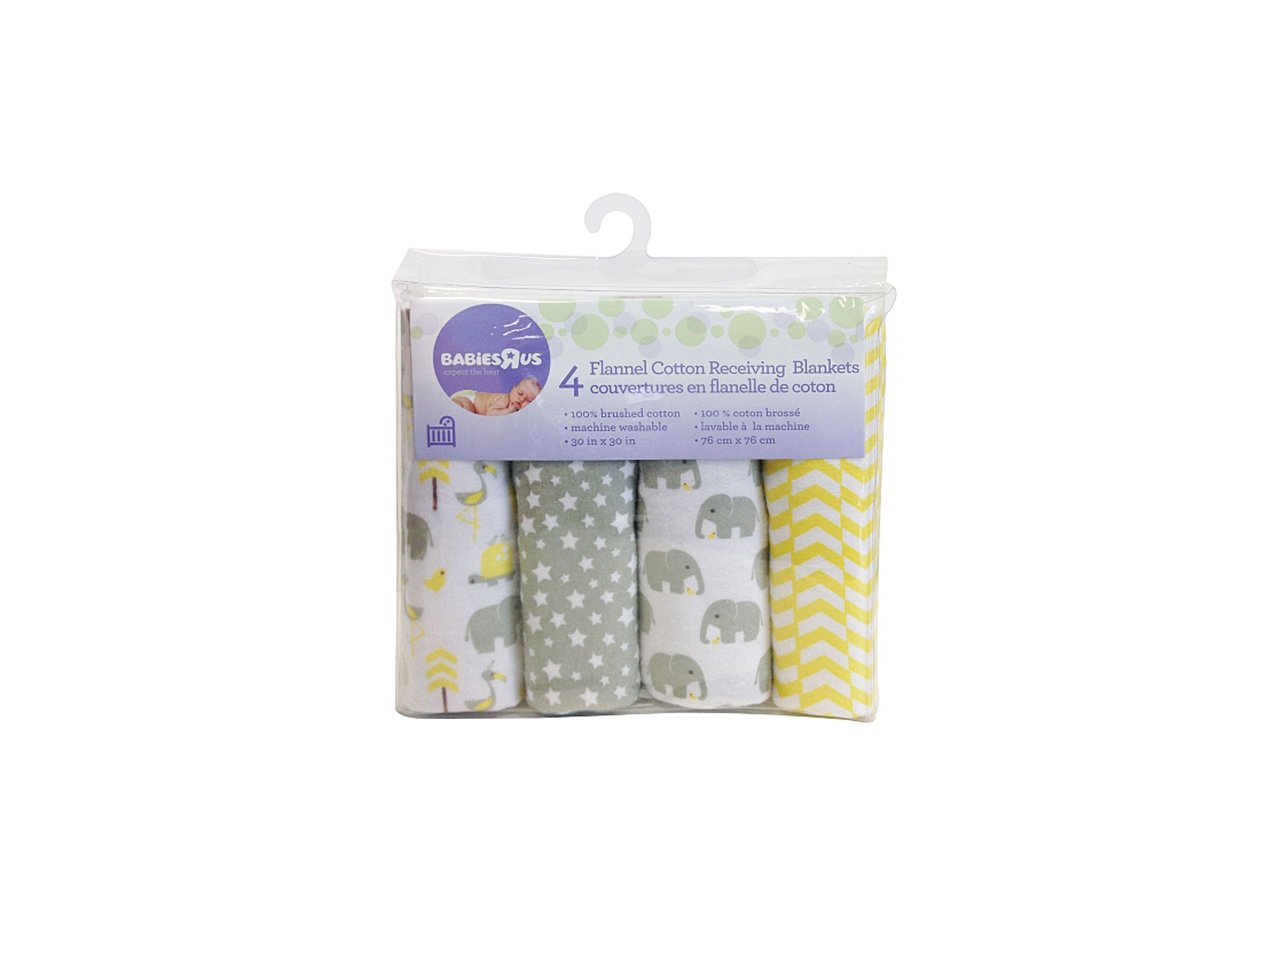 Babies R Us - Flannel Cotton Receiving Blanket 4-Pack - Green